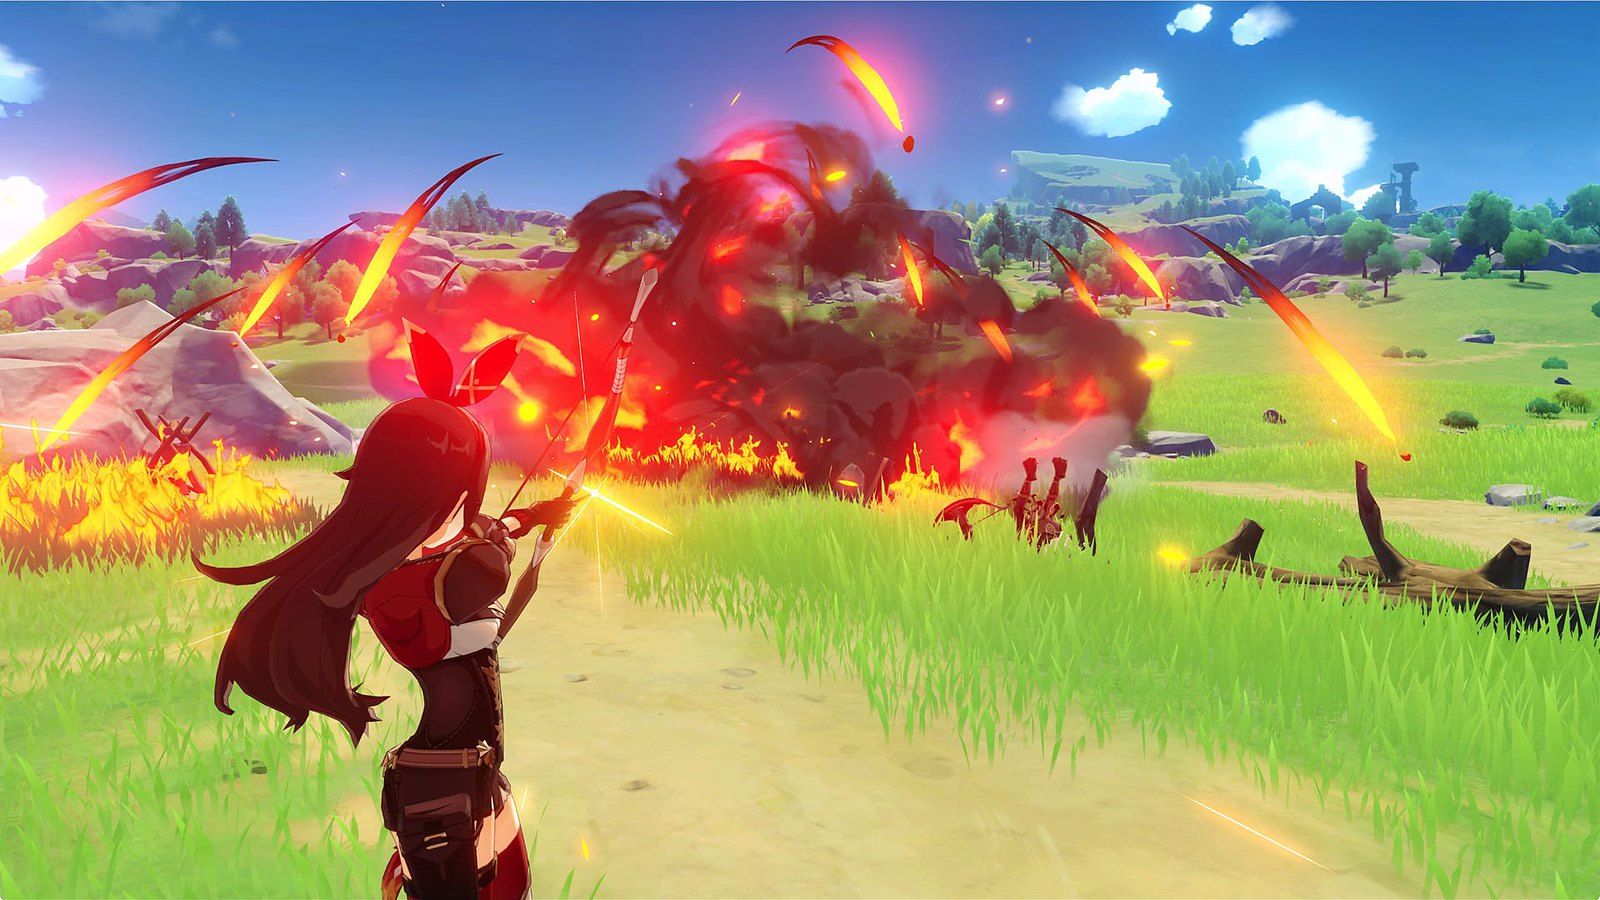 Breath Of The Wild Motivated Motion RPG Genshin Impact Enters Its Past Shut Beta